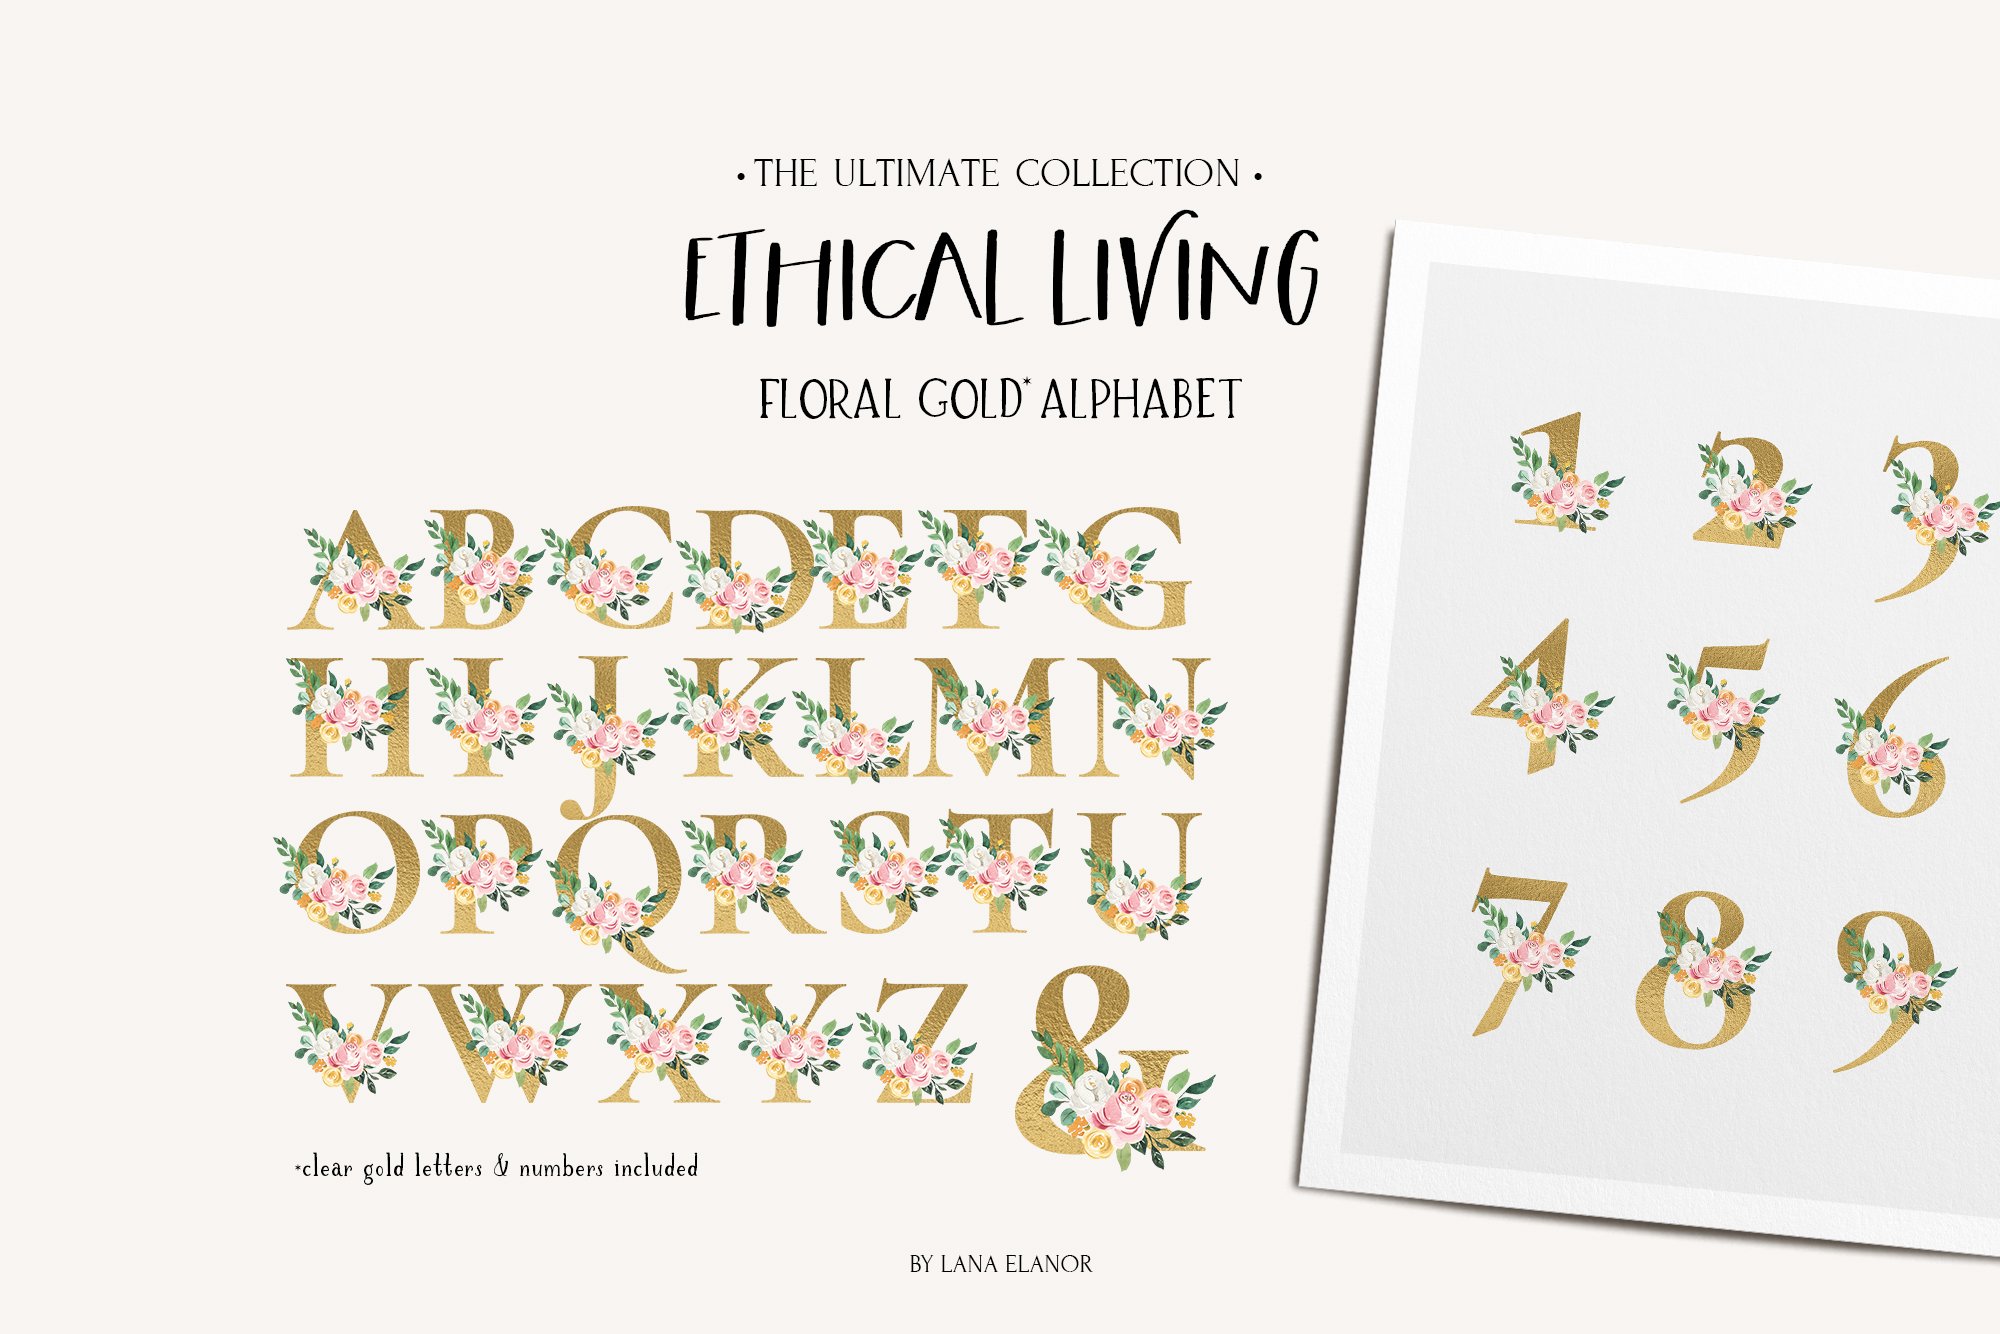 This ultimate collection includes floral gold alphabet.